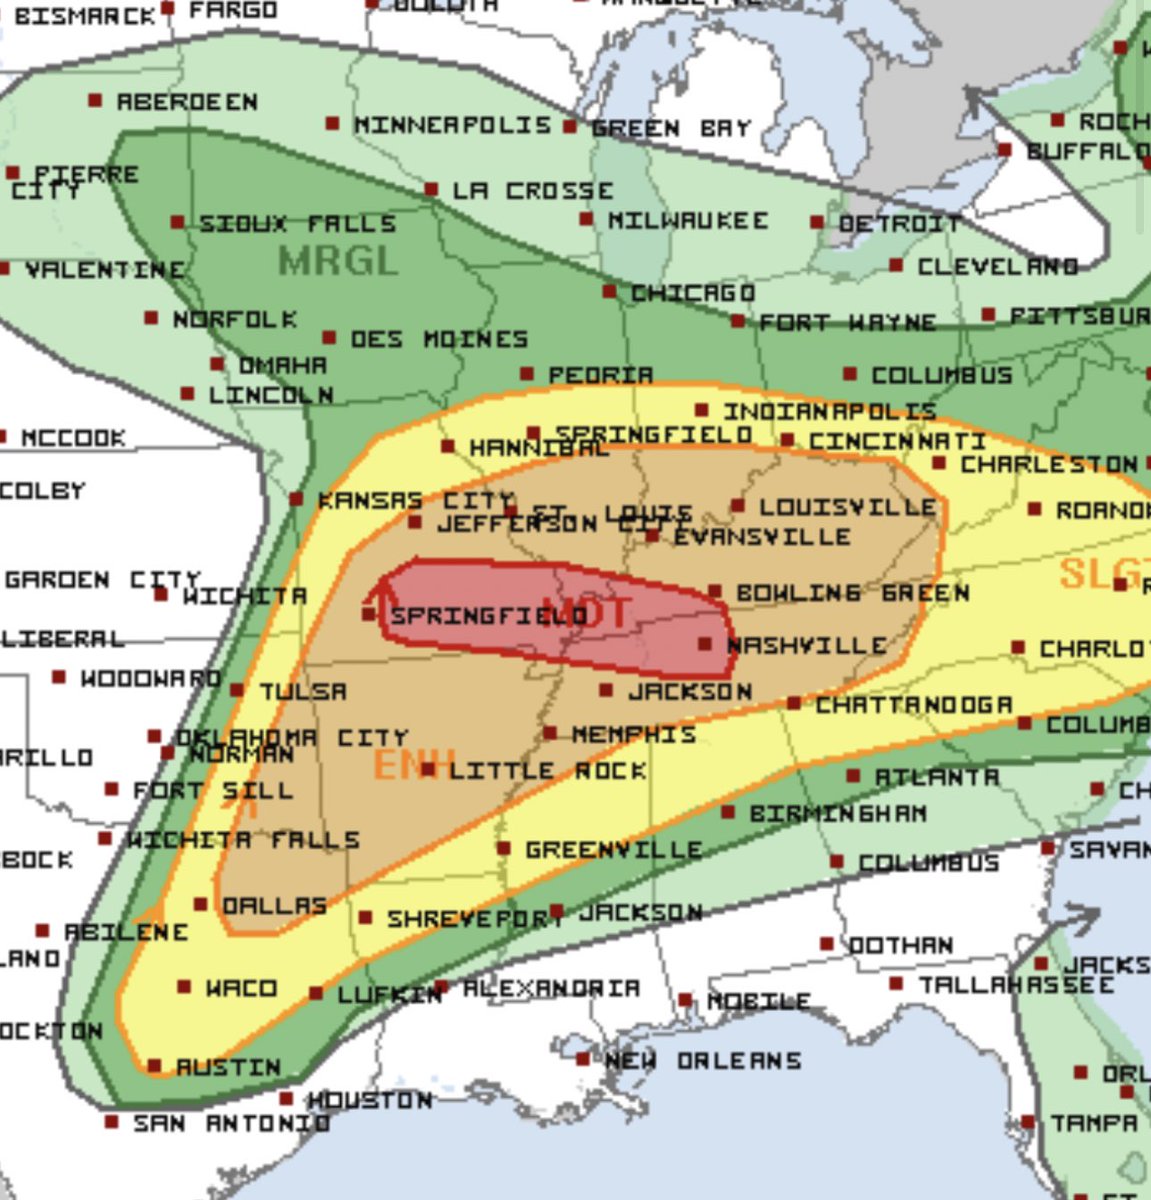 MODERATE RISK for all hazards severe weather including a threat of strong tornadoes across southern MO, IL into western KY/TN! We are back in the field with the Dominator 3 and will be in full #tornado intercept mode tomorrow, with the goal of recording surface wind and pressure…